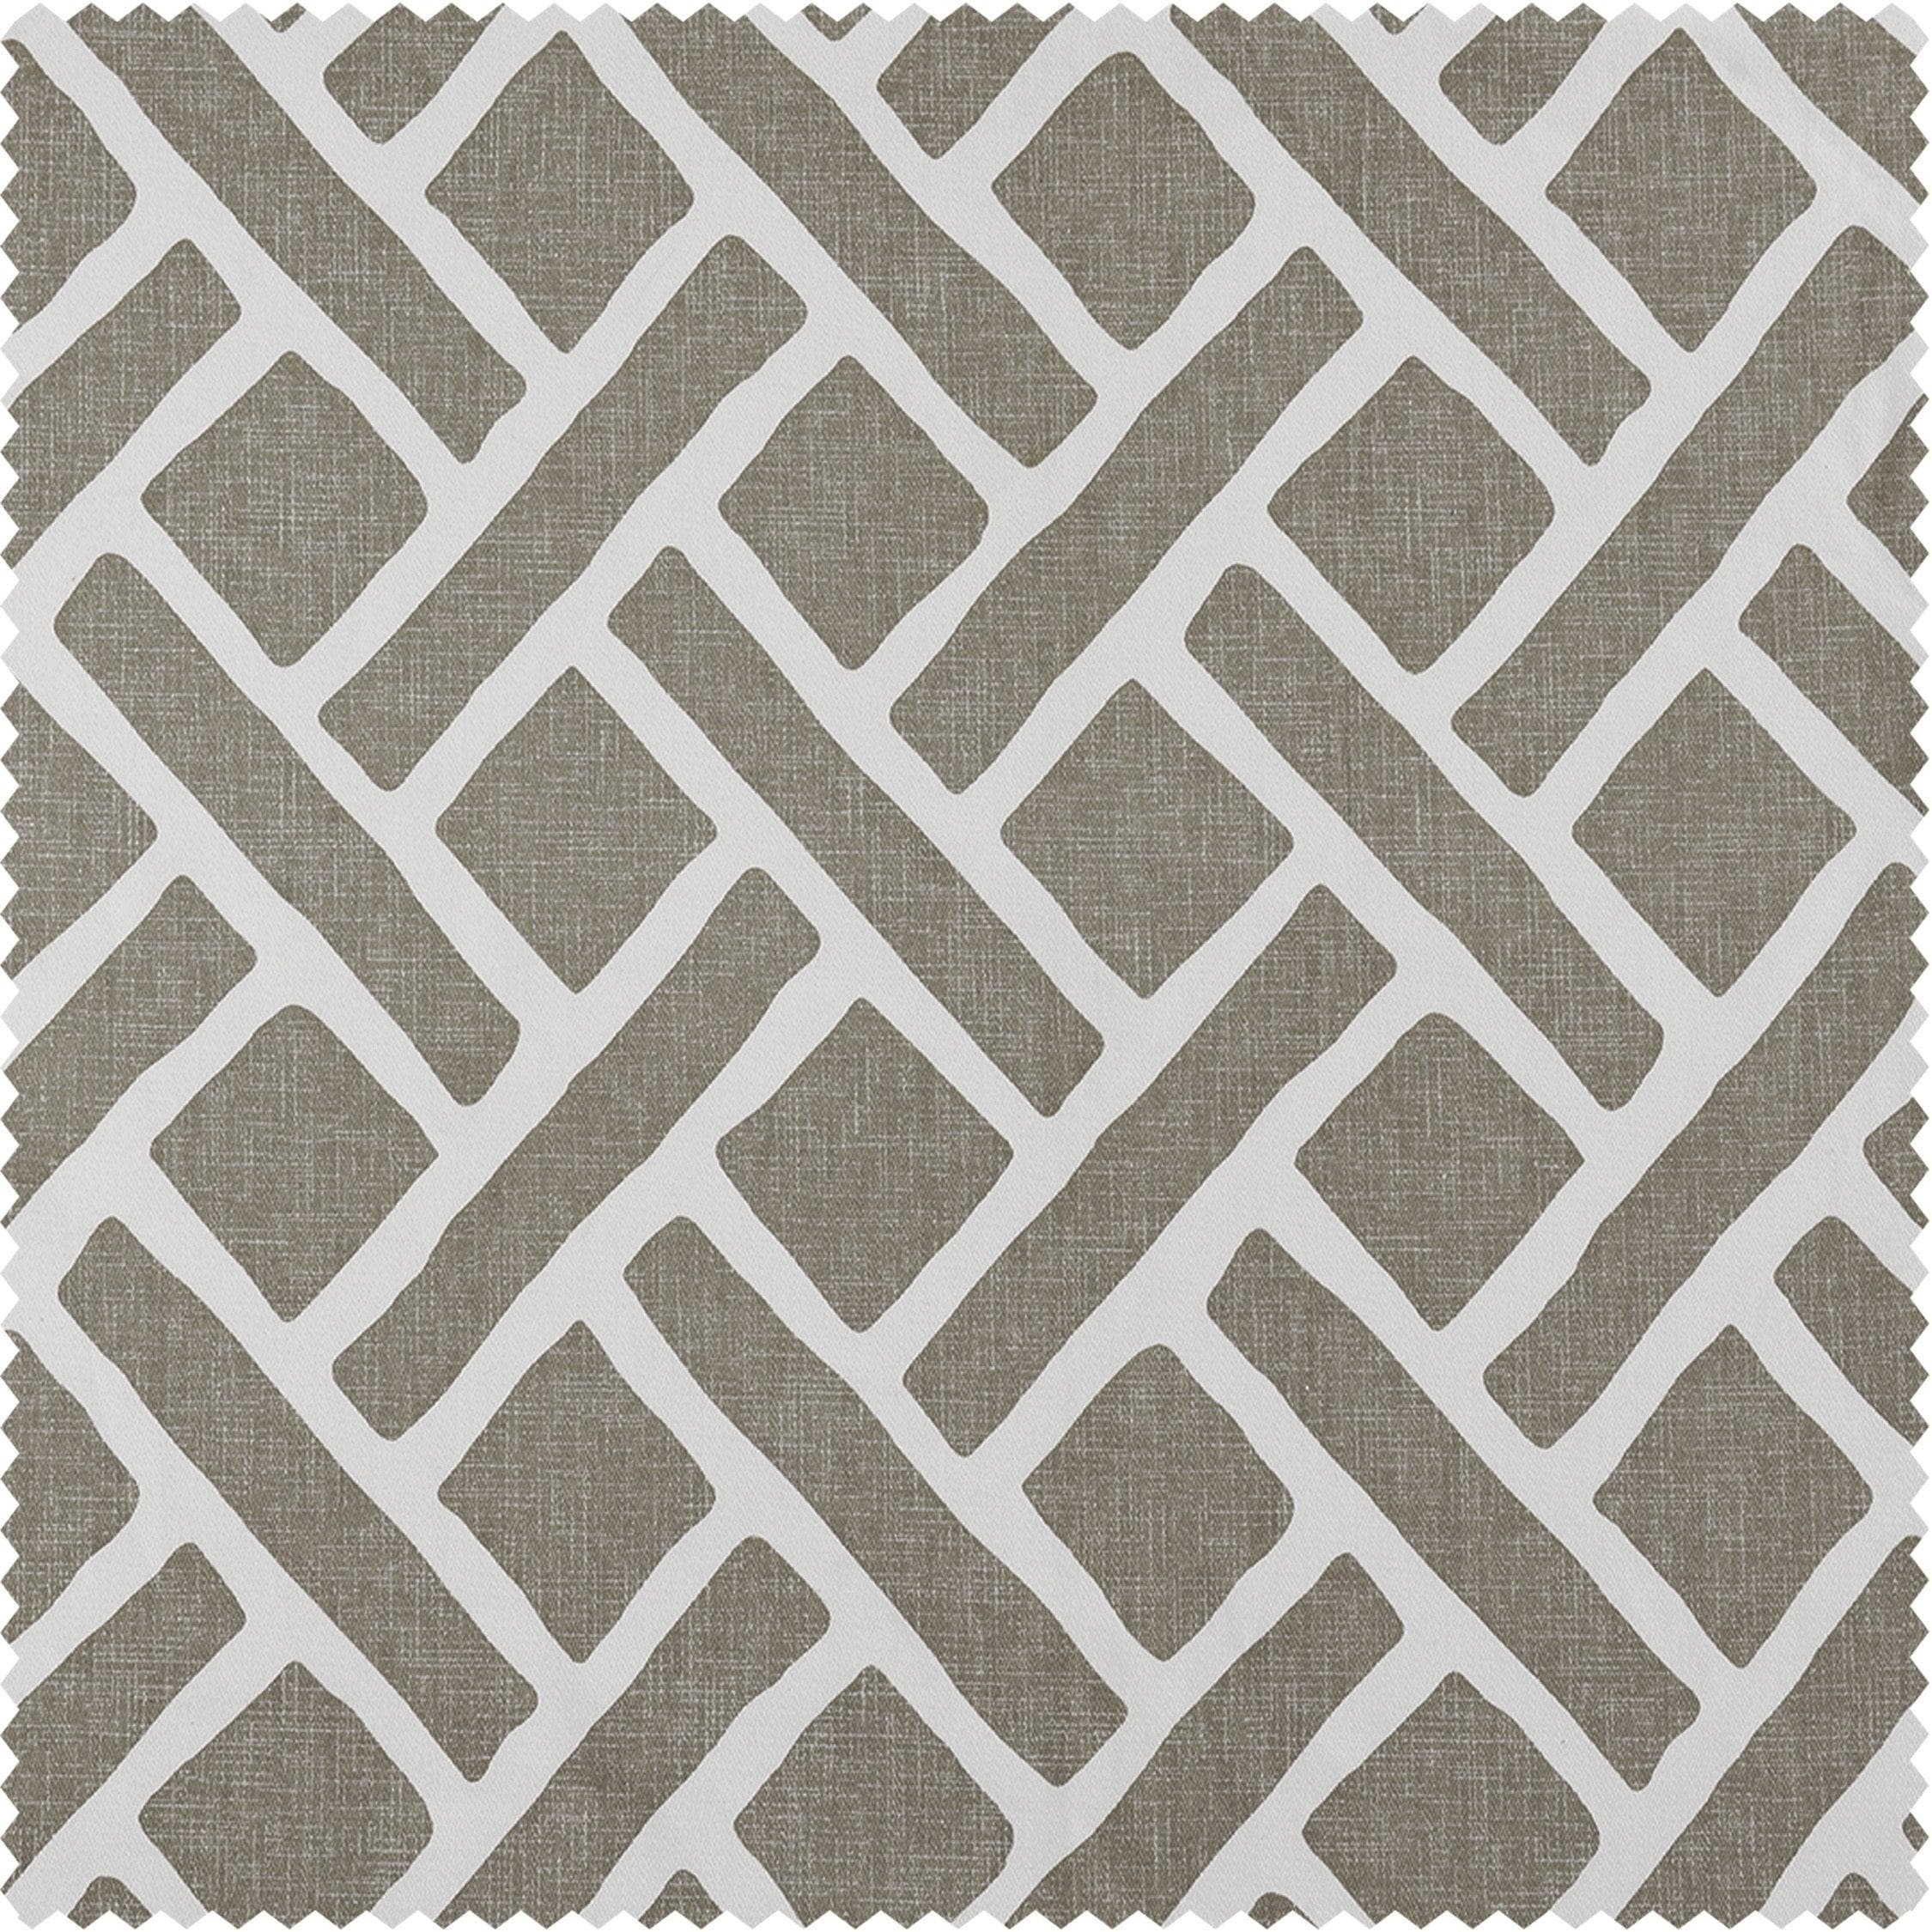 Martinique Taupe Geometric Printed Cotton Cushion Covers - Pair